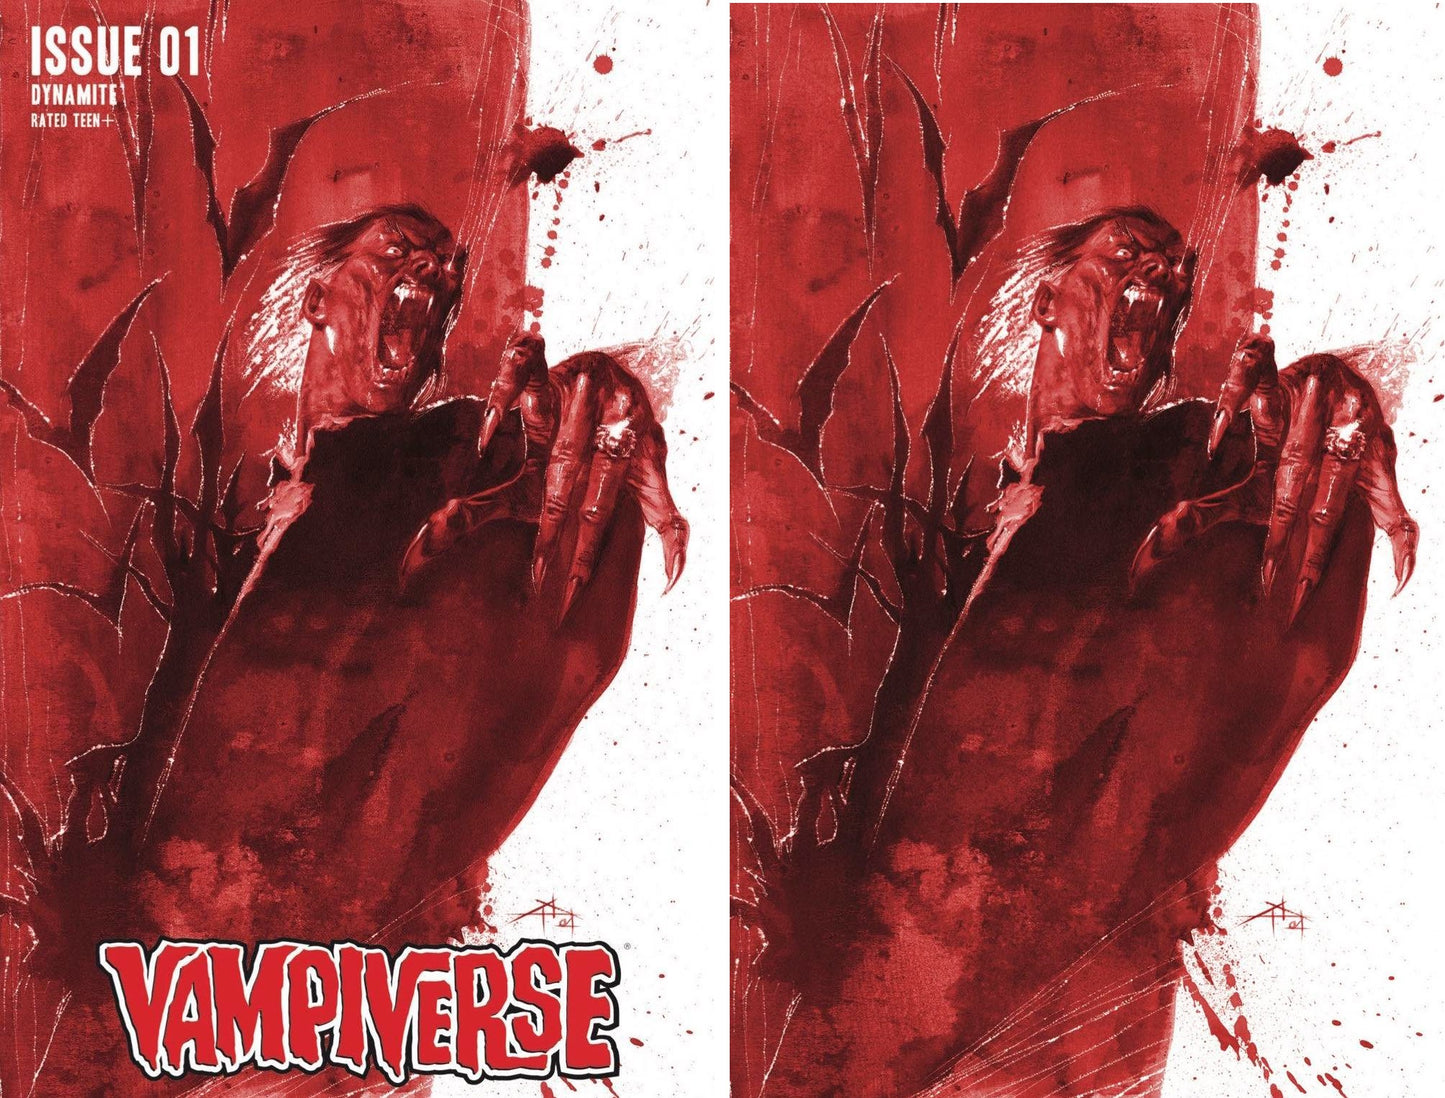 VAMPIVERSE #1 GABRIELE DELL'OTTO TRADE/VIRGIN VARIANT SET LIMITED TO 333 SETS